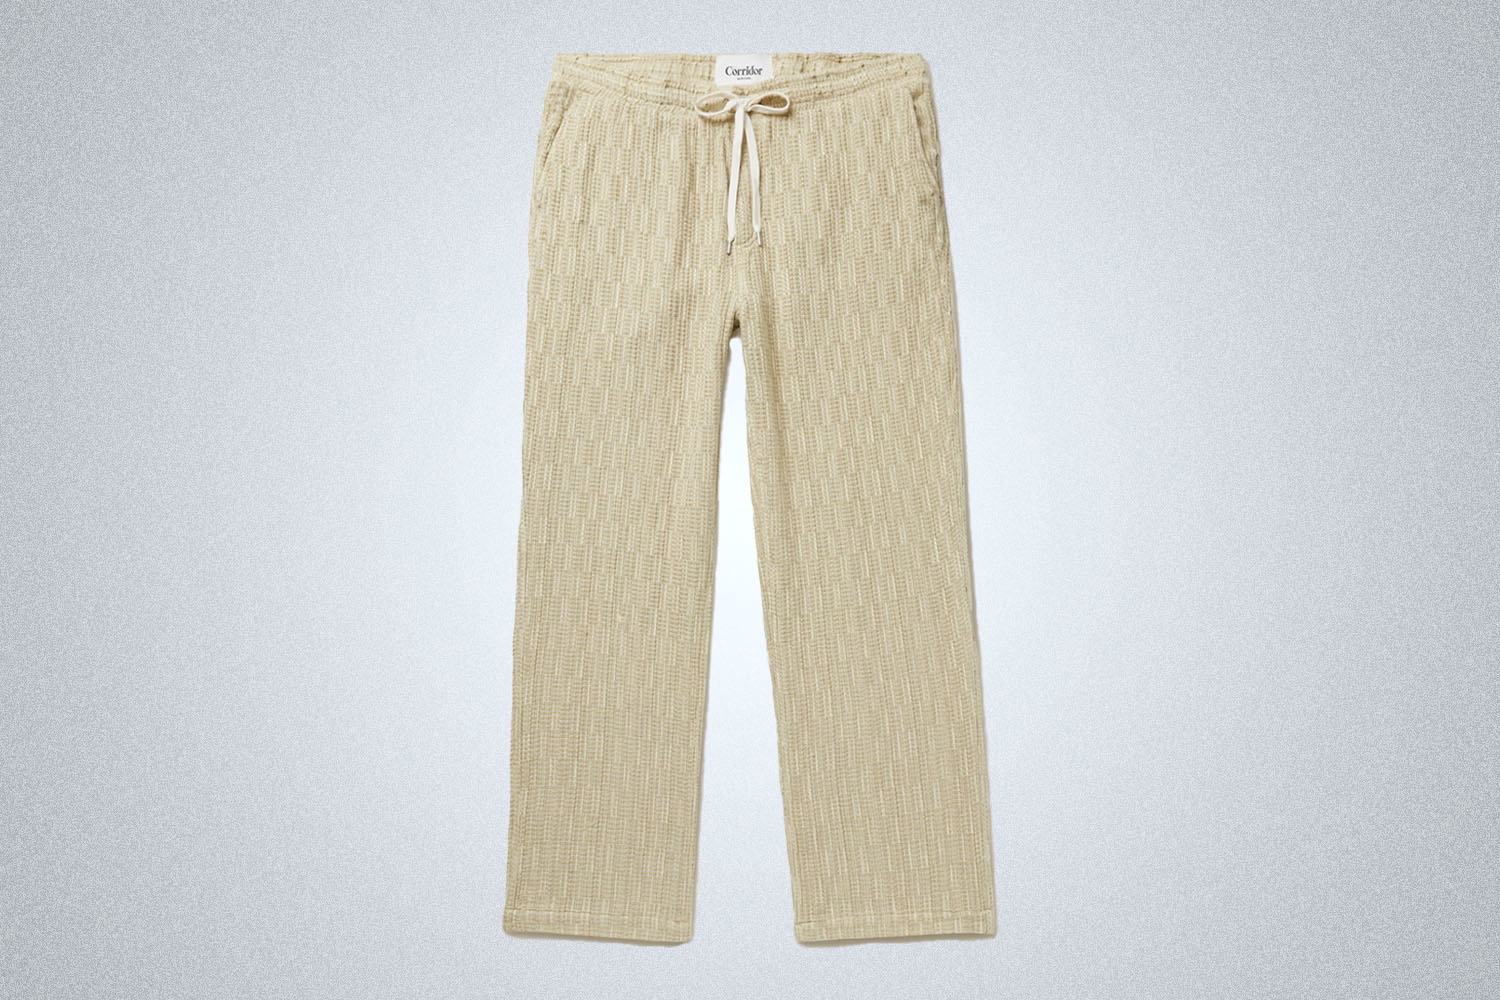 a pair of tan pants from Corridor on a grey background